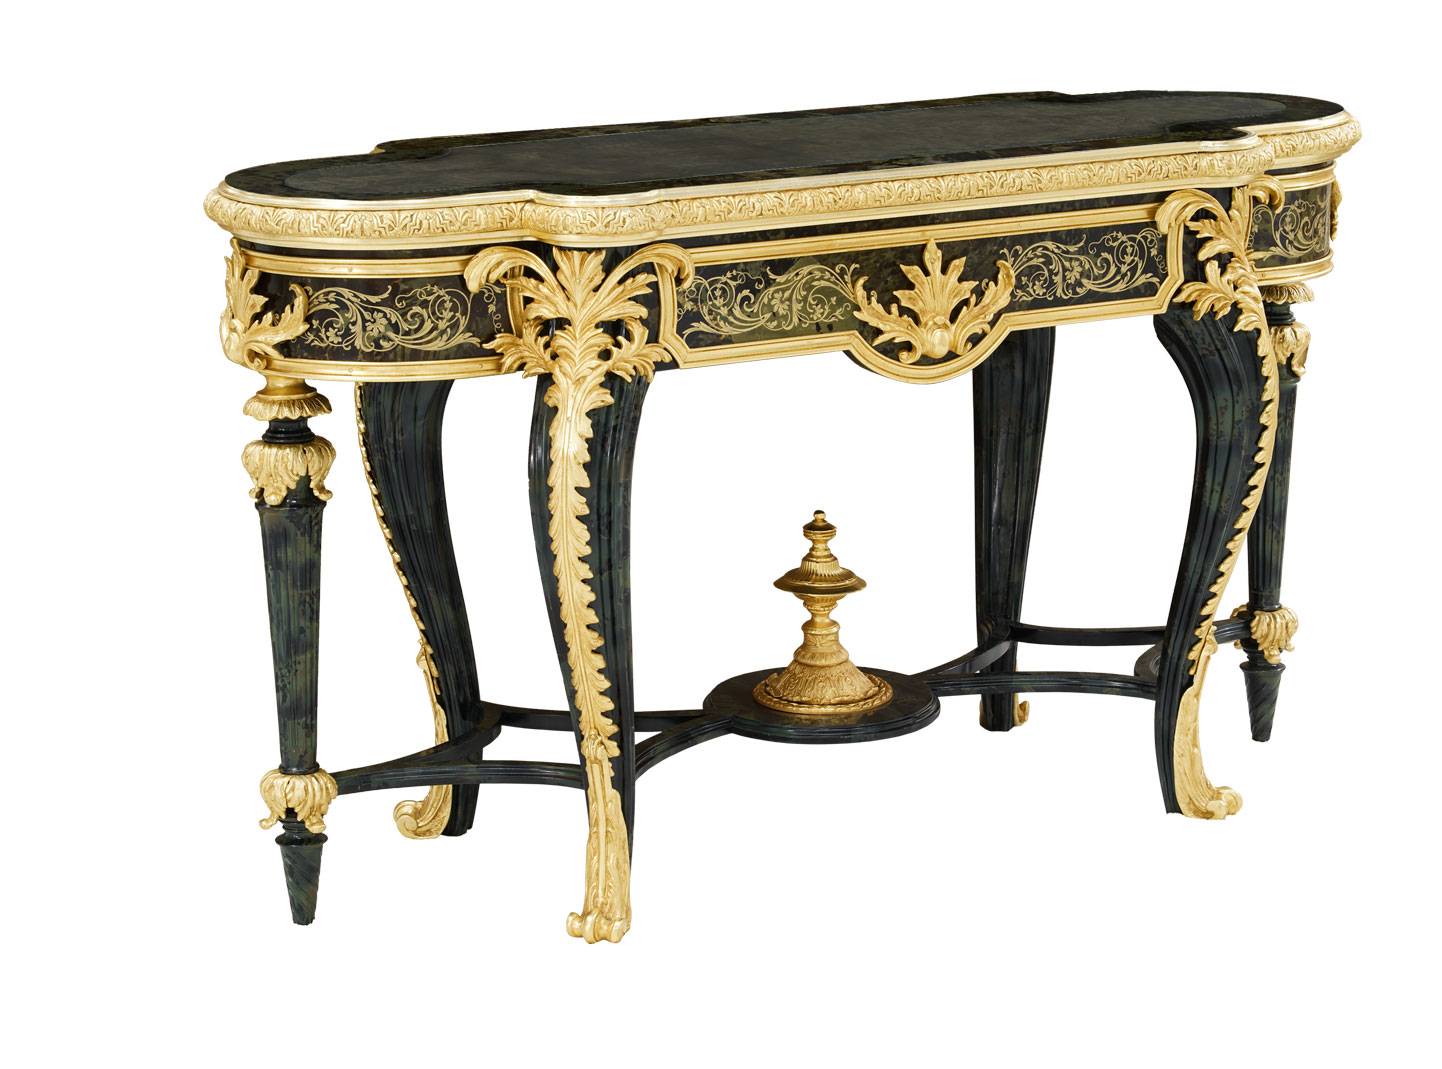 ART. 2185 - C.G. Capelletti quality furniture with made in Italy contemporary Console